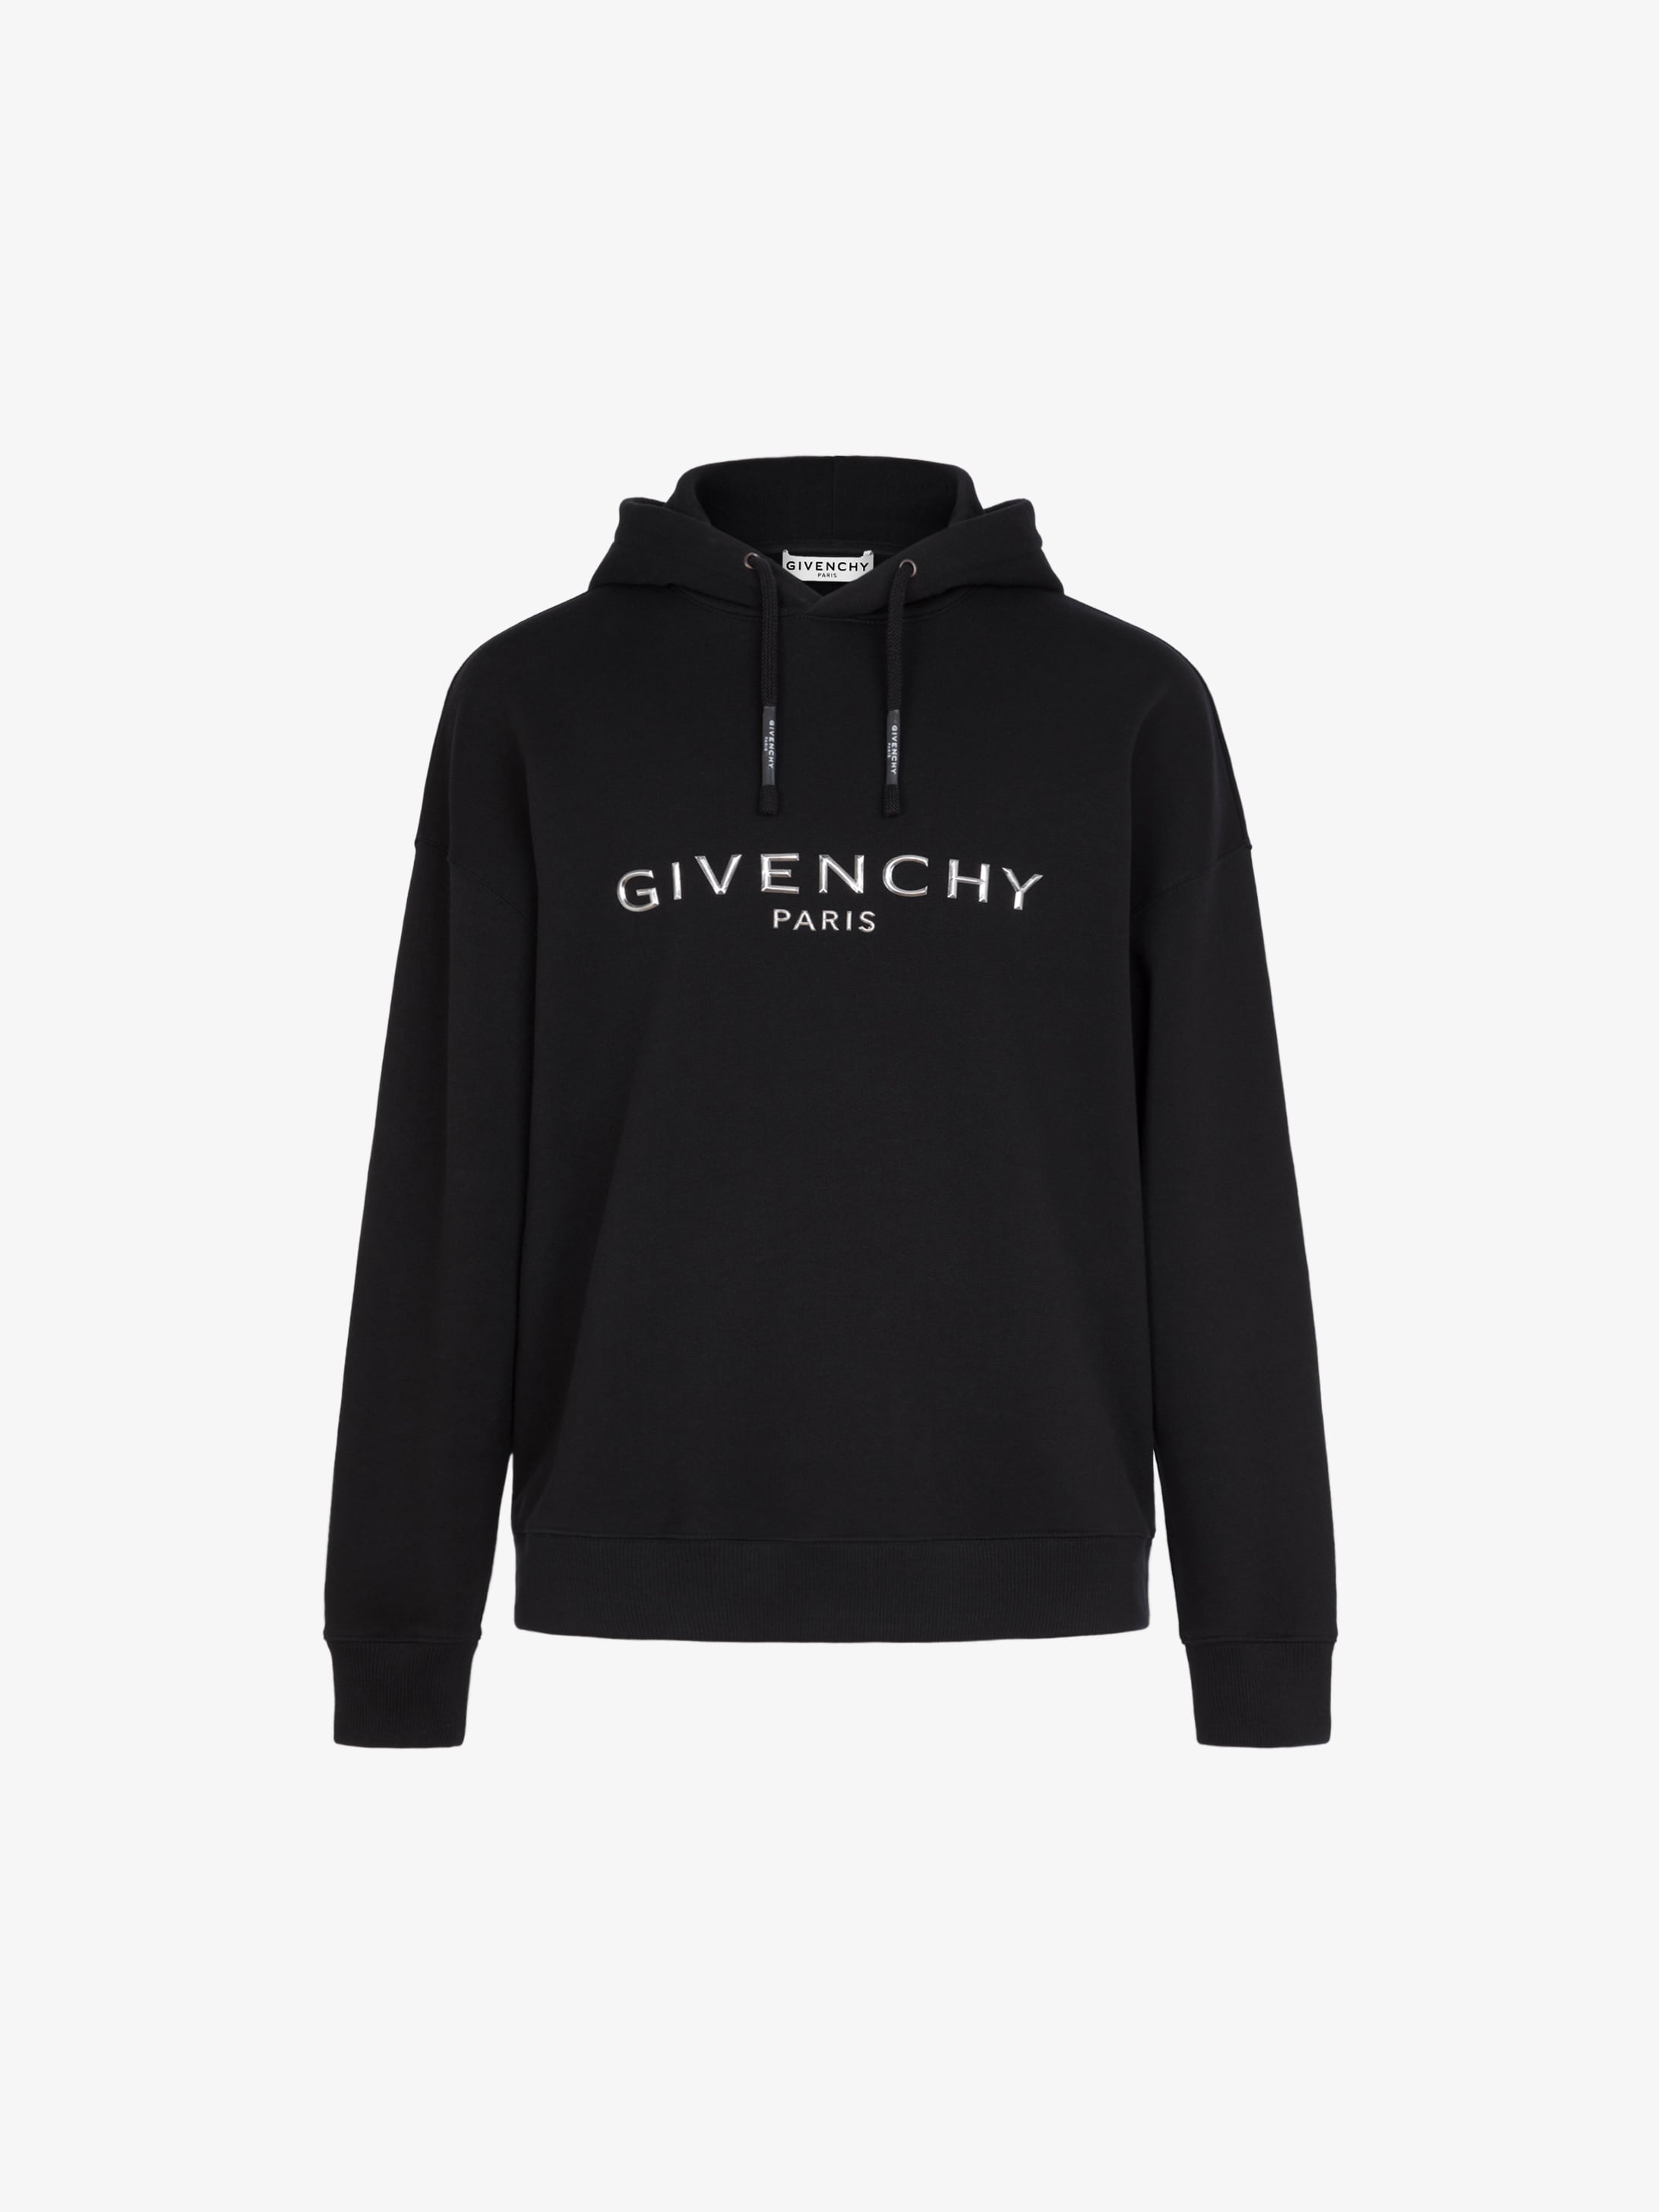 GIVENCHY PARIS embossed hoodie | GIVENCHY Paris